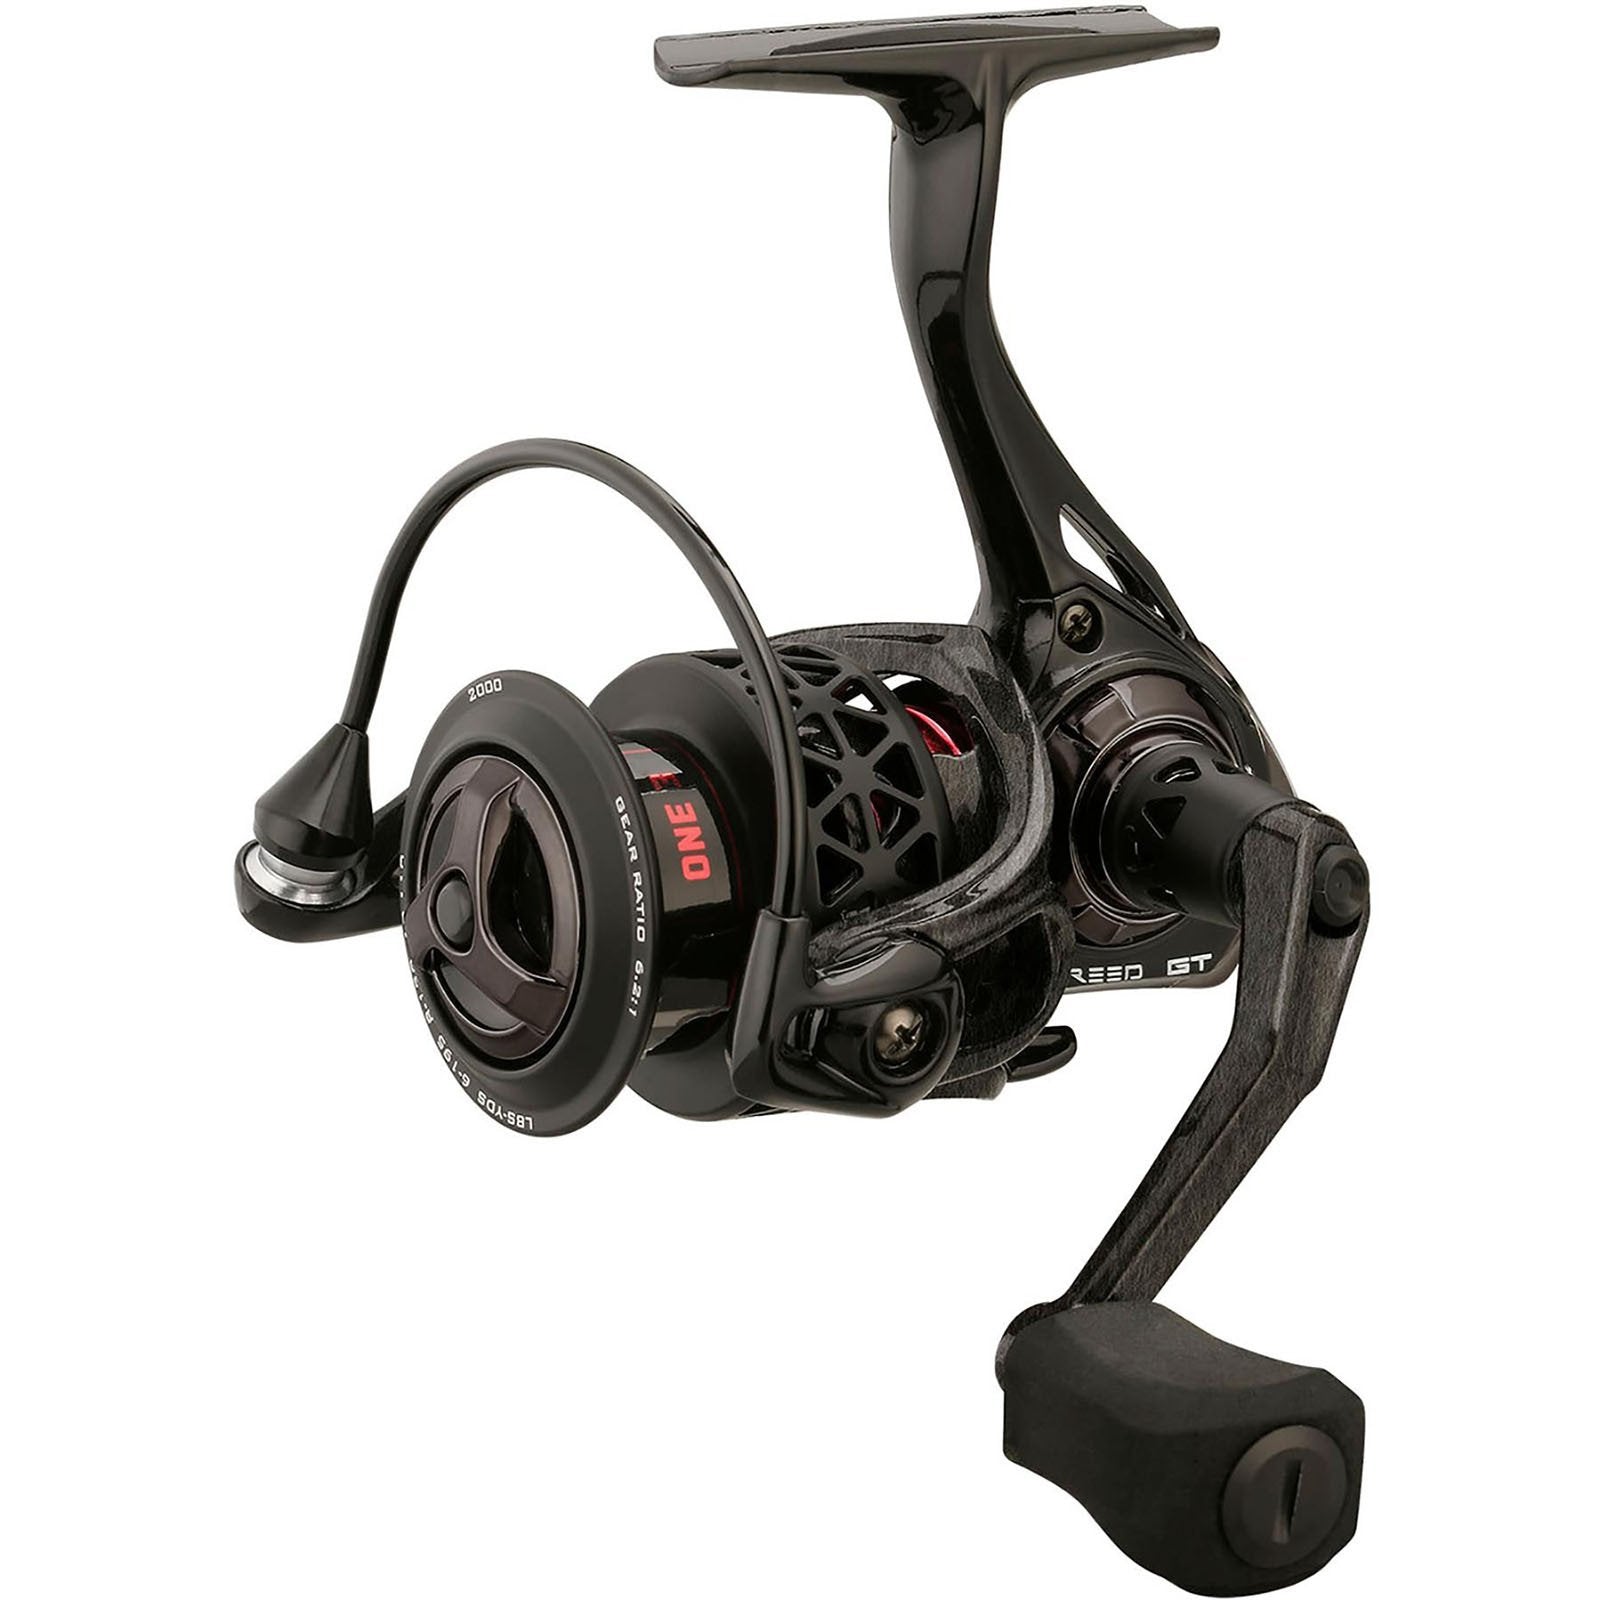 13 FISHING - CREED GT - SPINNING REEL - Tackle Depot